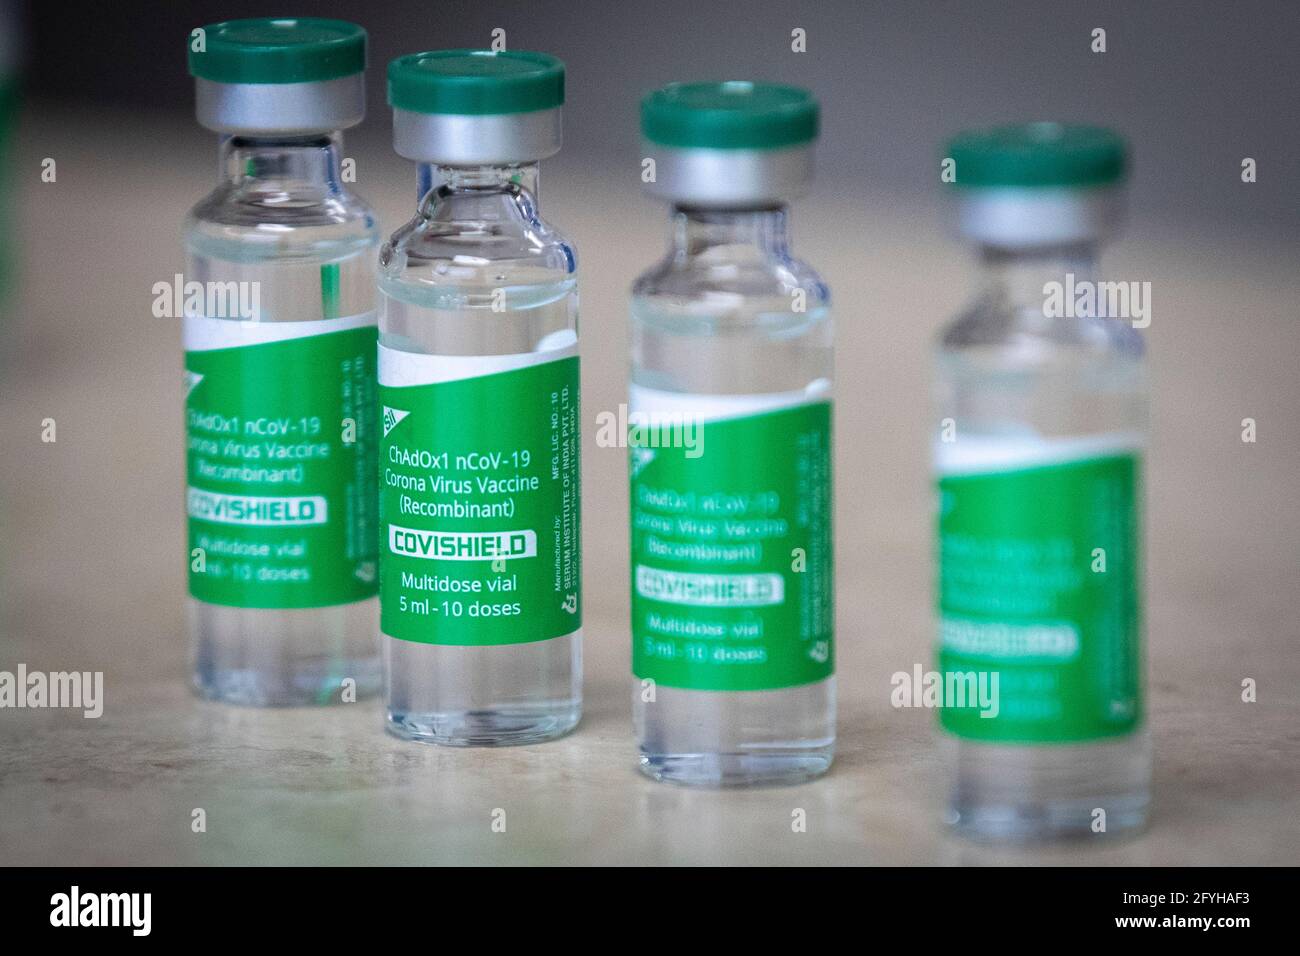 Several vials of the AstraZeneca COVID-19 vaccine at a pharmacy in Kingston, Ontario on Thursday, March 18, 2021, as the COVID-19 pandemic continues a Stock Photo